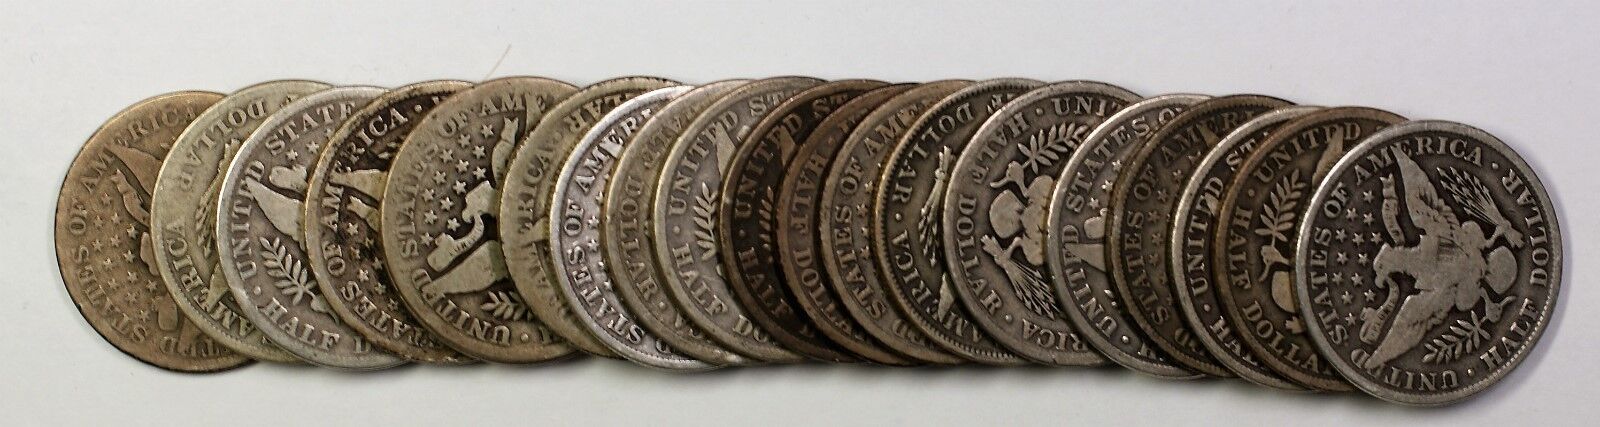 1908-S Barber Half Dollar 50c Roll 20 Circulated 90% Old Silver Coins Lot